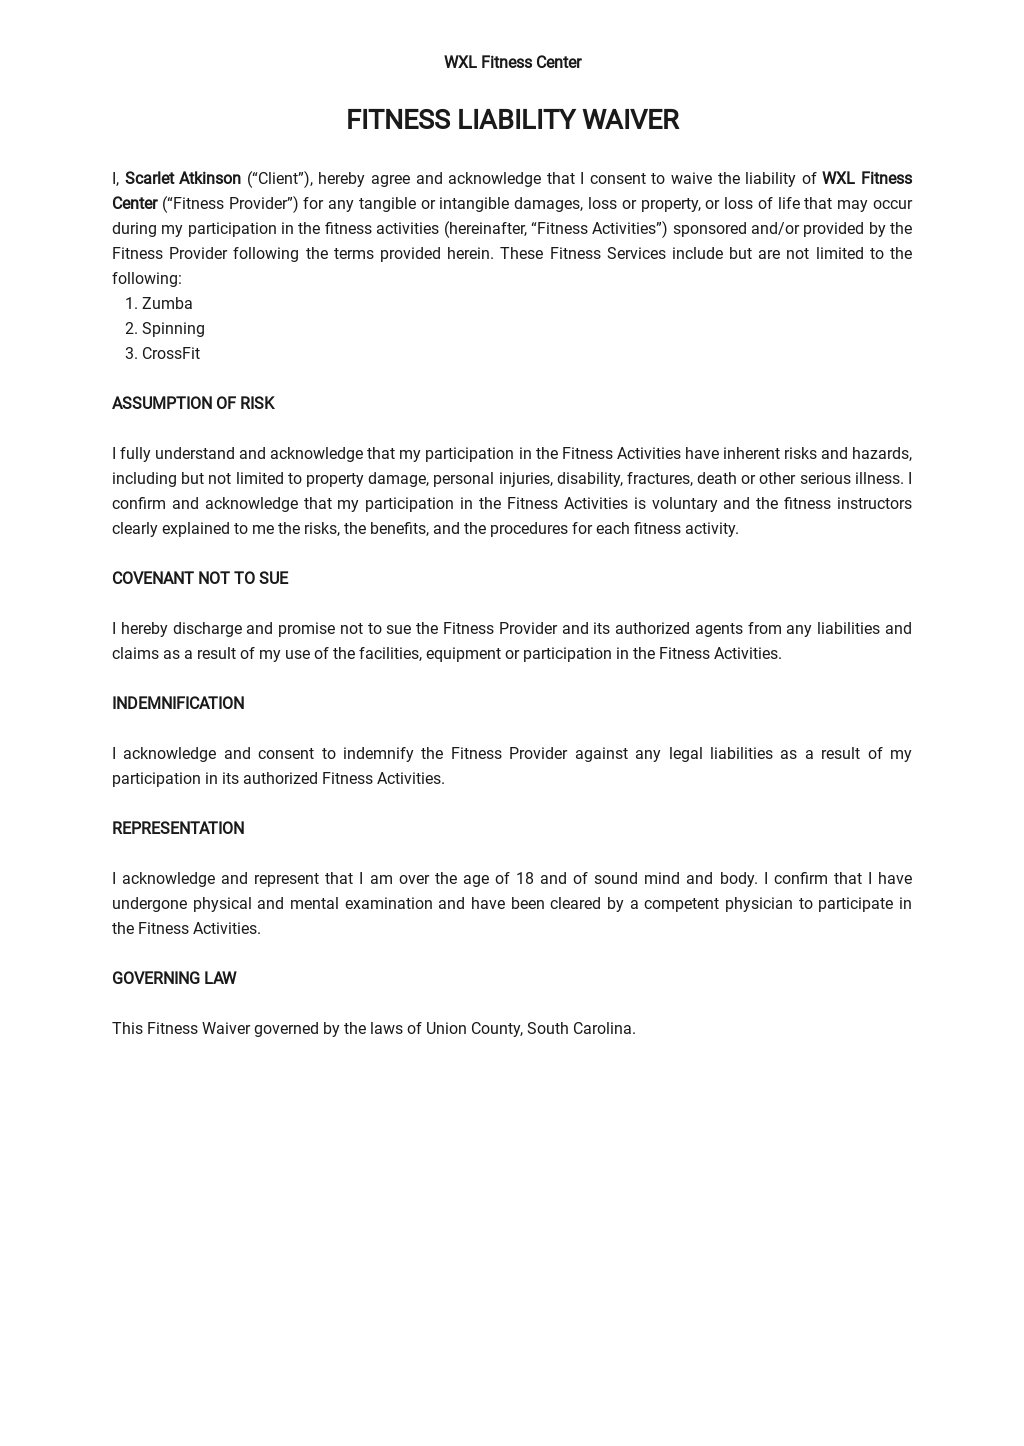 Fitness Liability Waiver Template Download in Word, Google Docs